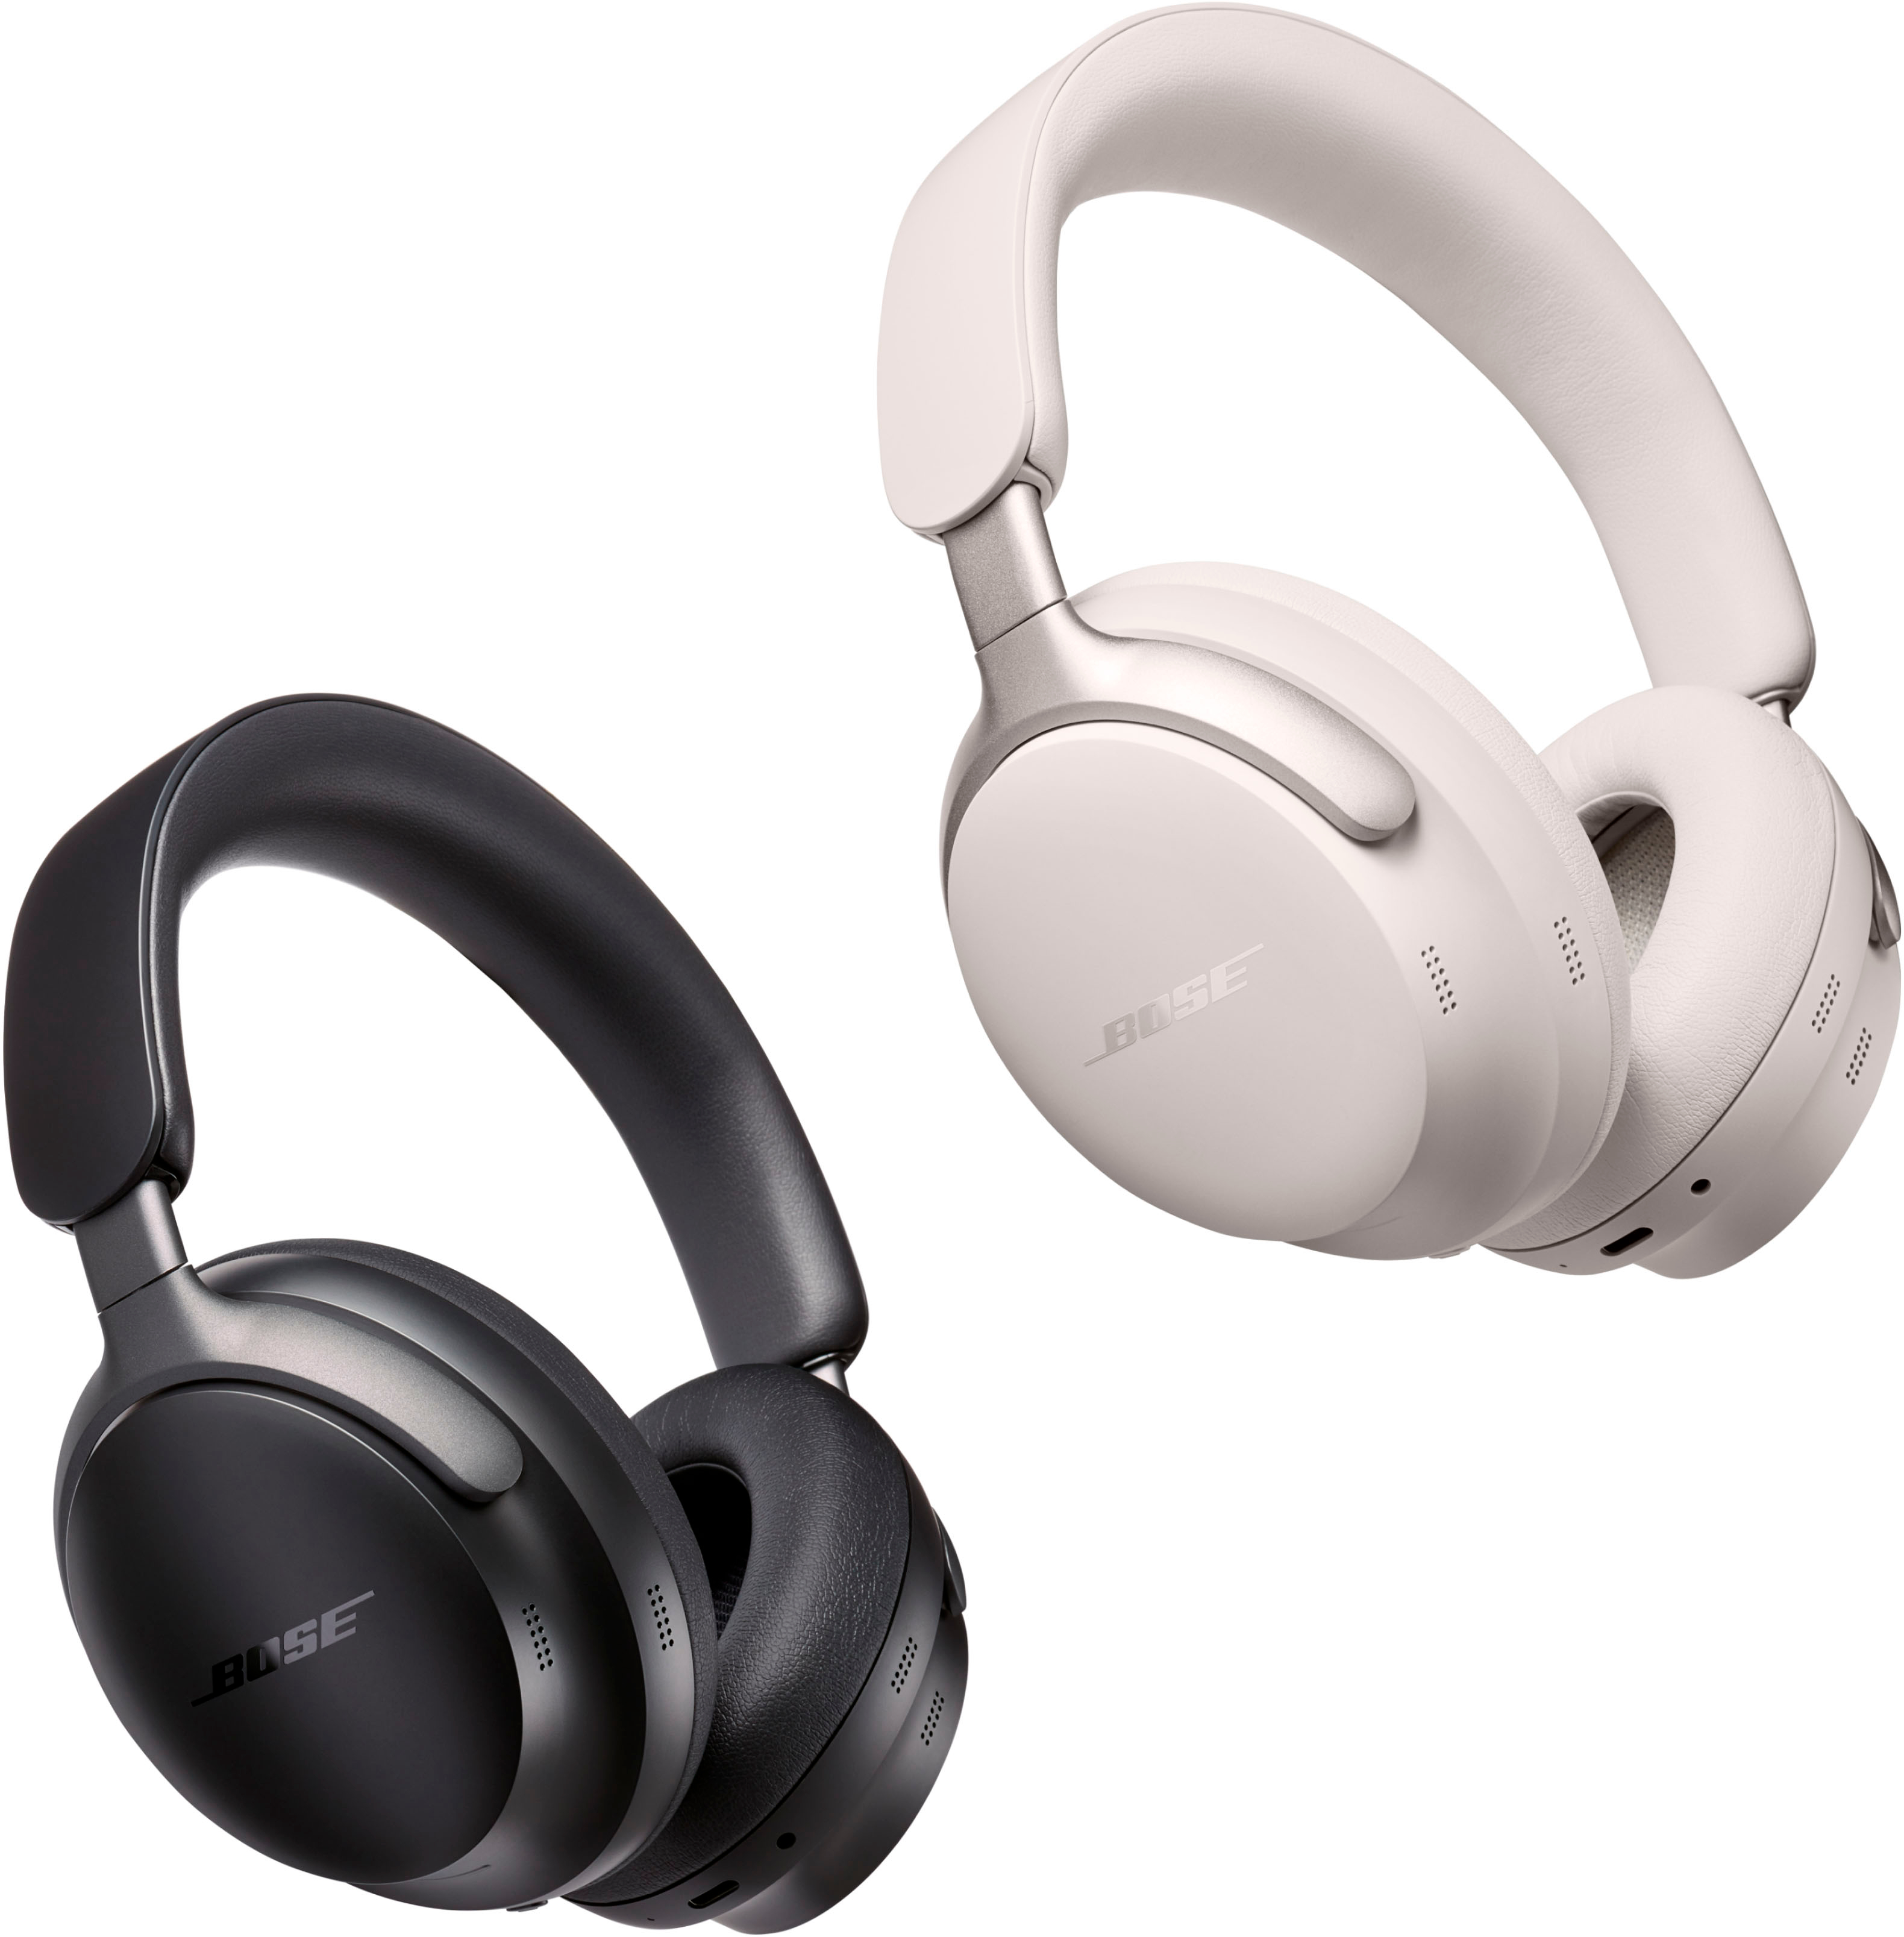 Buy Noise Bose Smoke Wireless QuietComfort Cancelling Headphones Ultra Best - 880066-0200 White Over-the-Ear